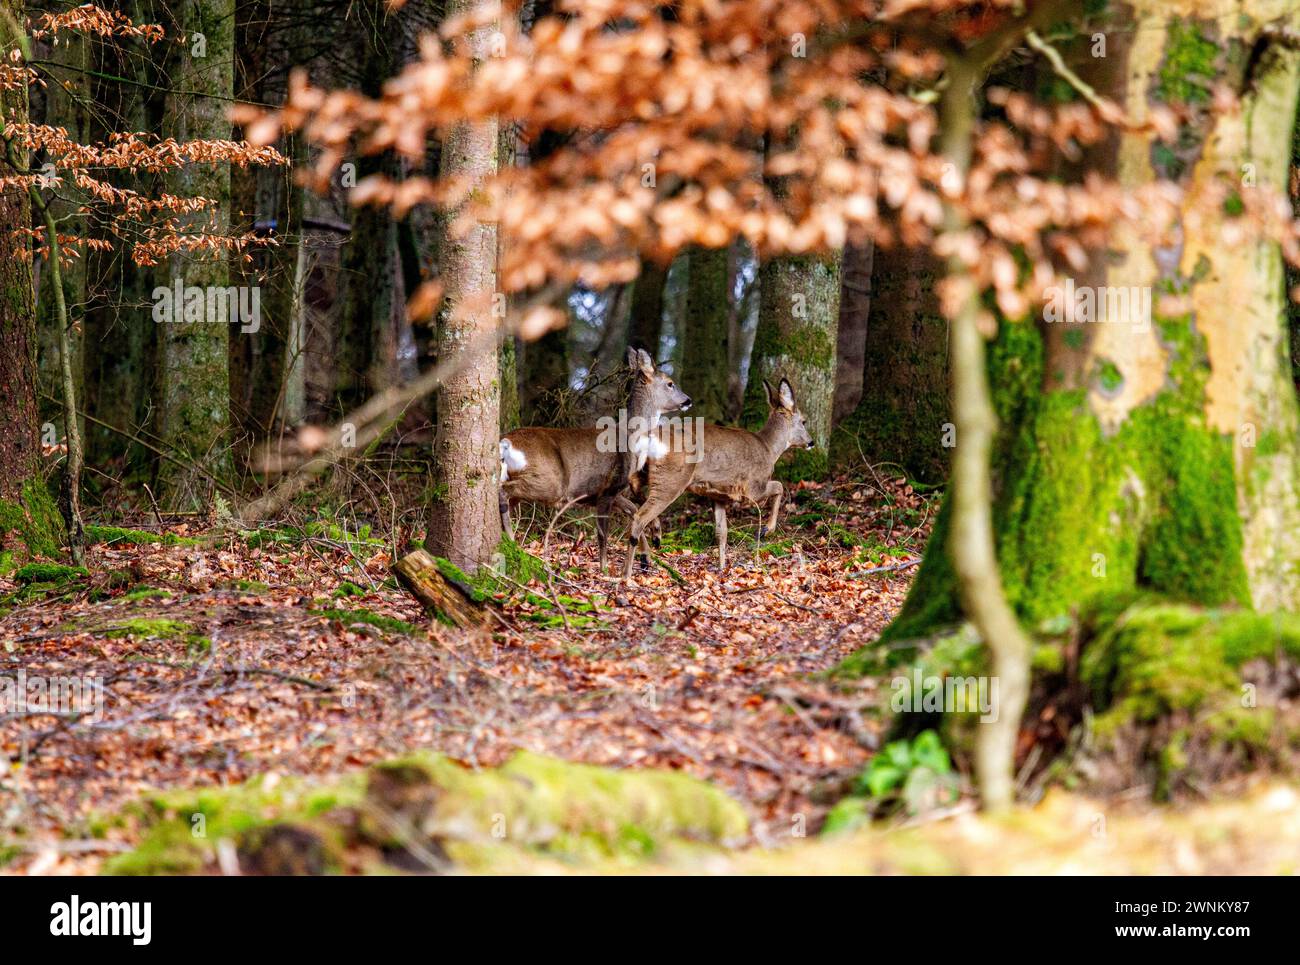 Dundee, Tayside, Scotland, UK. 3rd Mar, 2024. UK Weather: Templeton Woods around Dundee has excellent March scenery, including wildlife, oddly shaped trees, and nature walks. White rump roe deer graze freely in the woodlands during the spring-like weather. Credit: Dundee Photographics/Alamy Live News Stock Photo